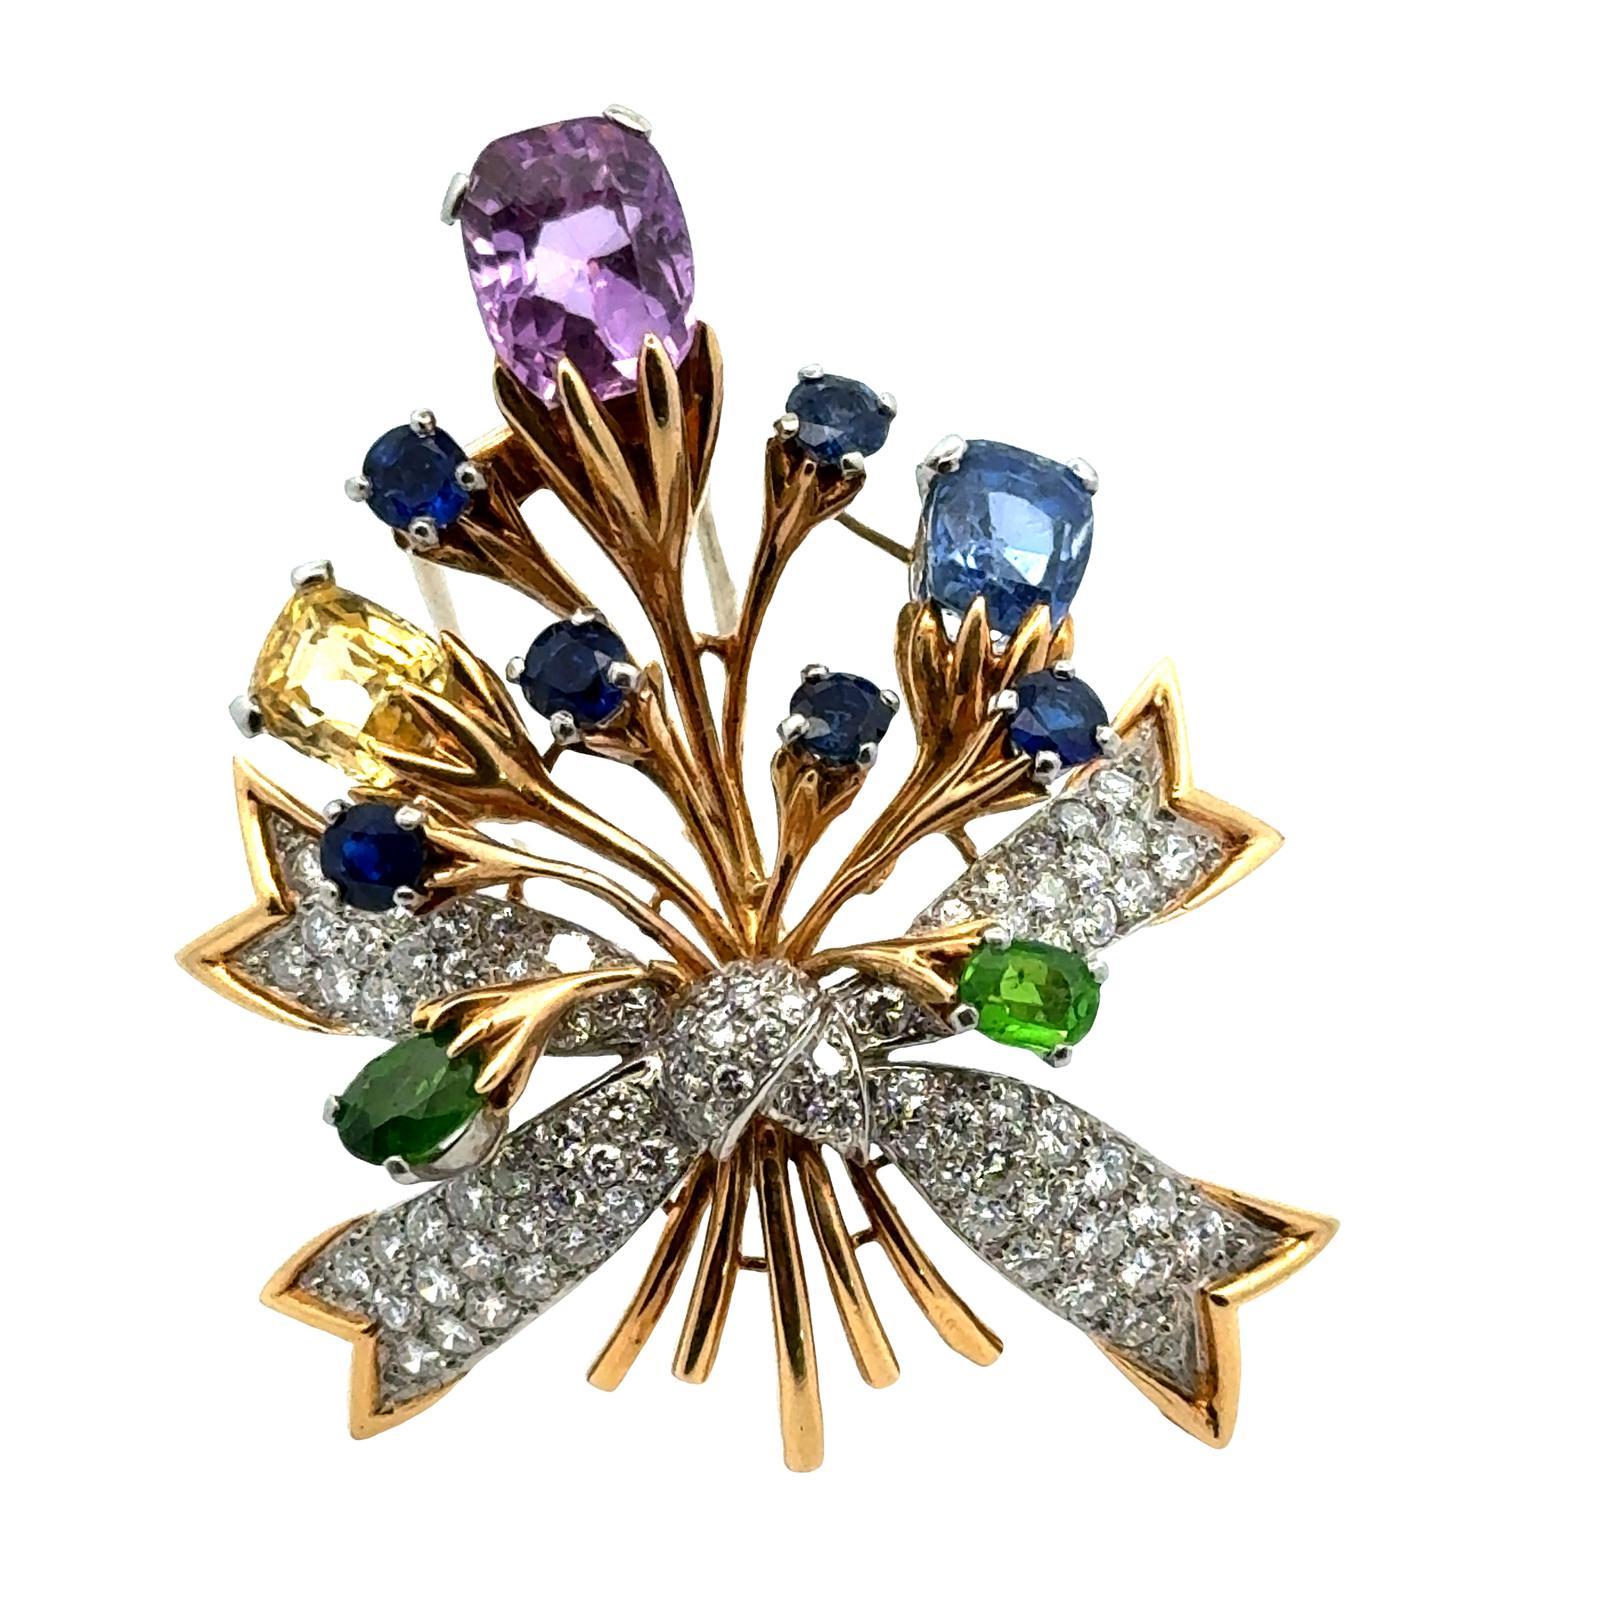  This rare lapel pin brooch by Jean Sclumberger for Tiffany & Co. is adorned with a cushion-cut natural pink sapphire without any treatments approx. 4.70 carats, one square cushion natural sapphire approx. 2.00 carats and six round-faceted blue